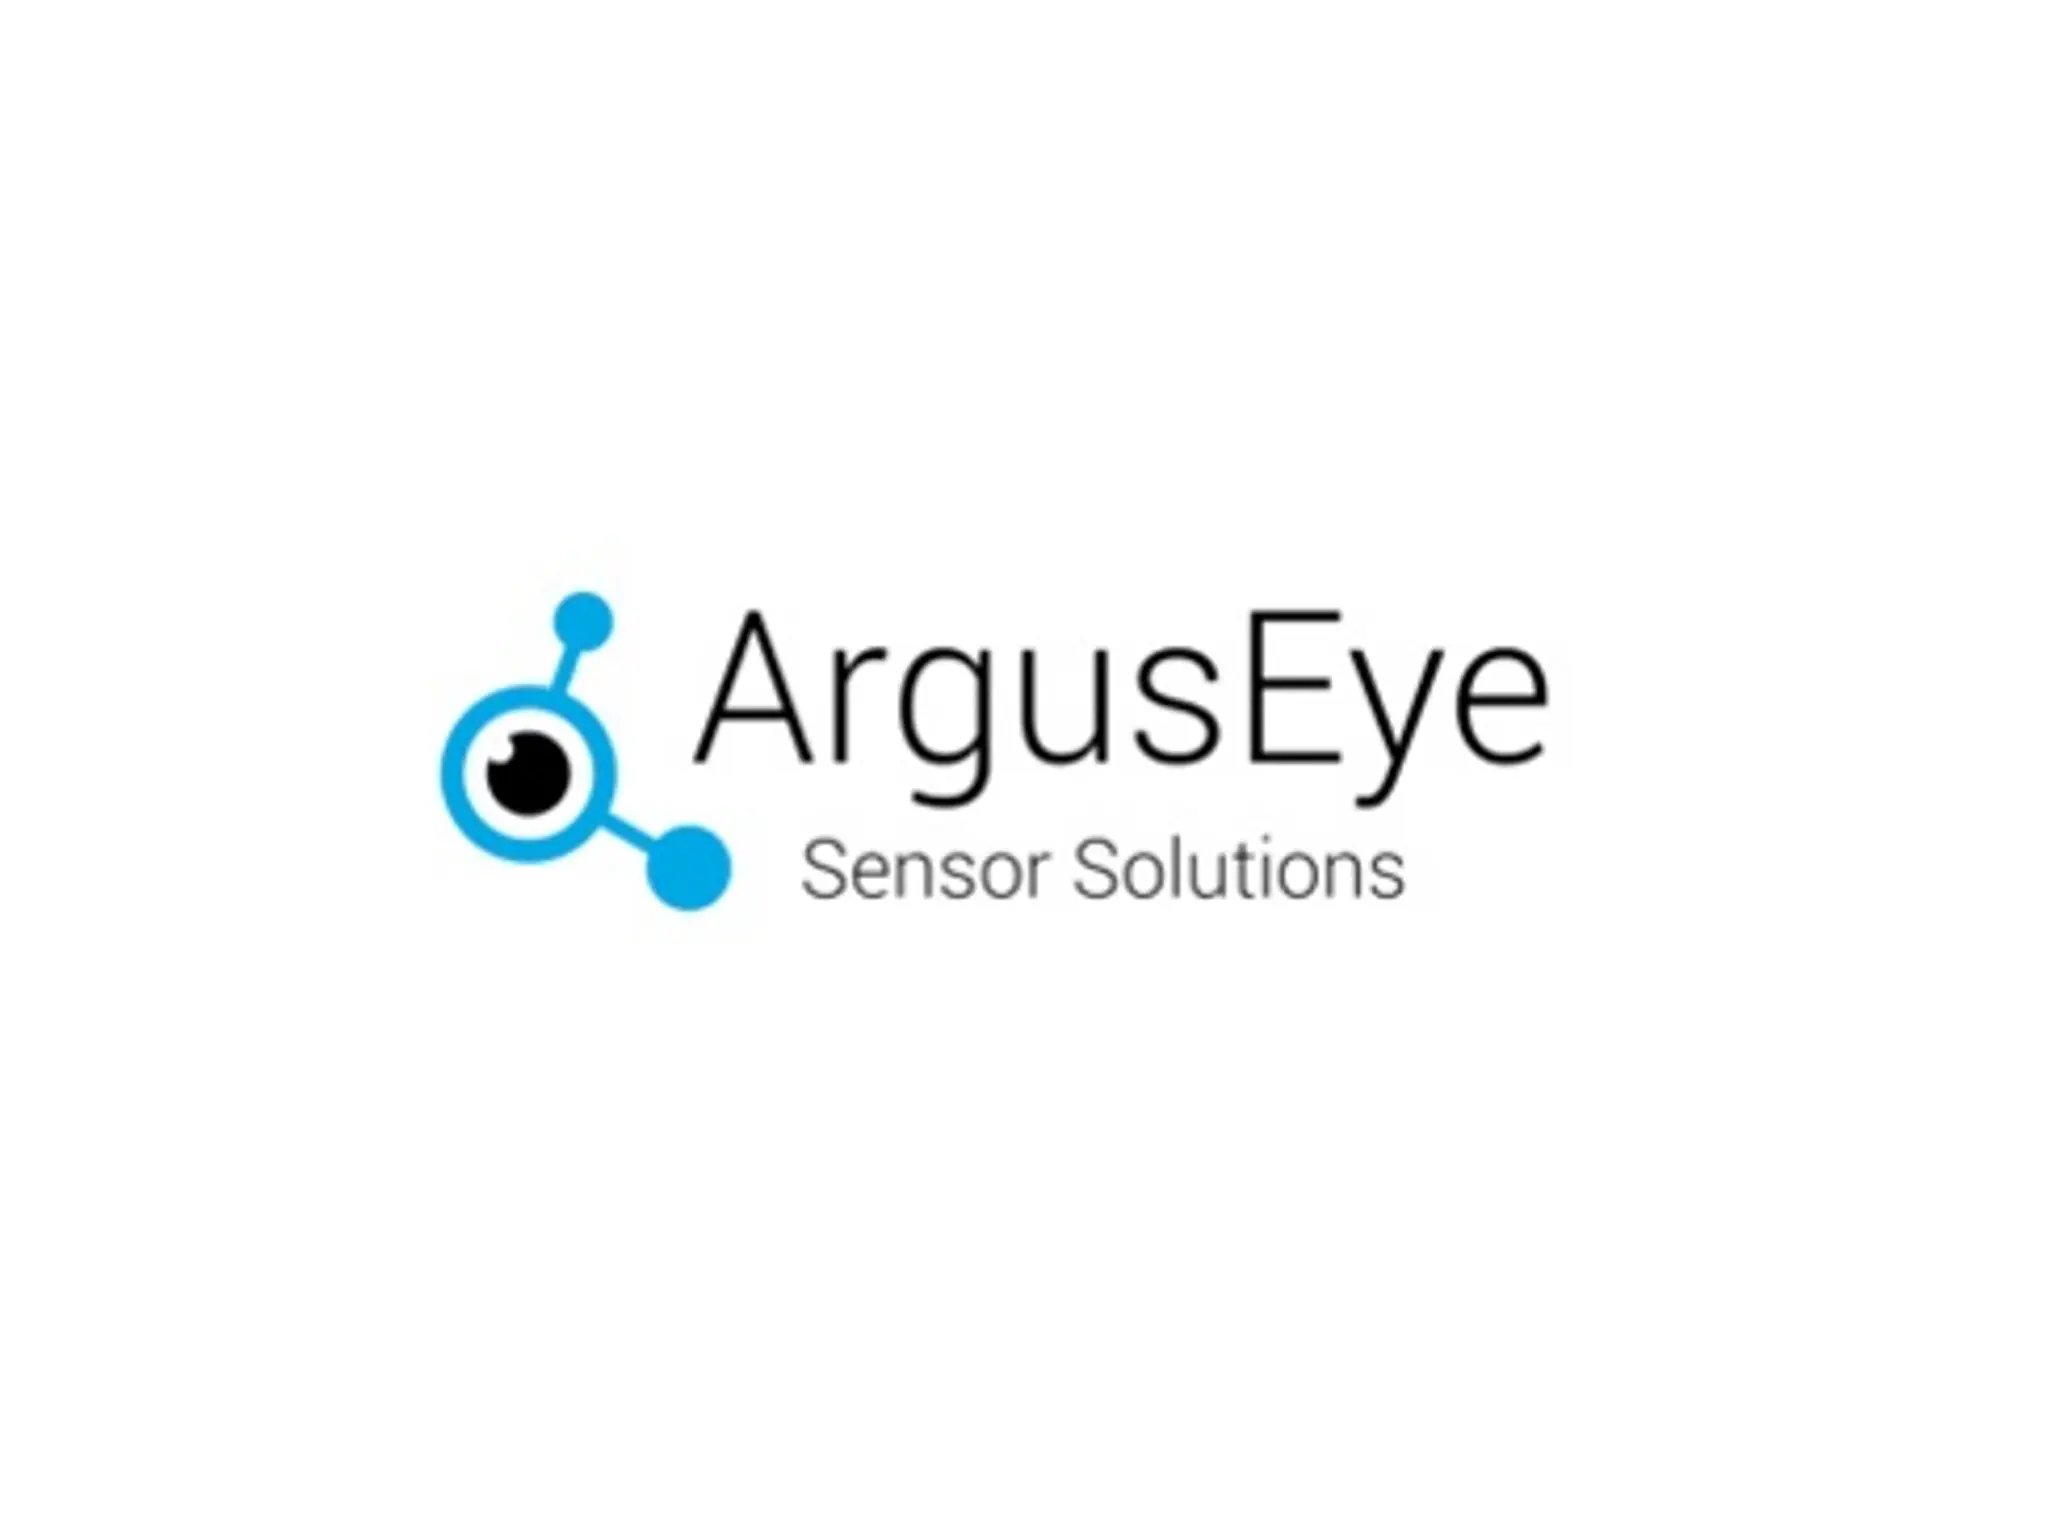 ArgusEye introduces AugaOne to accelerate downstream bioprocess development